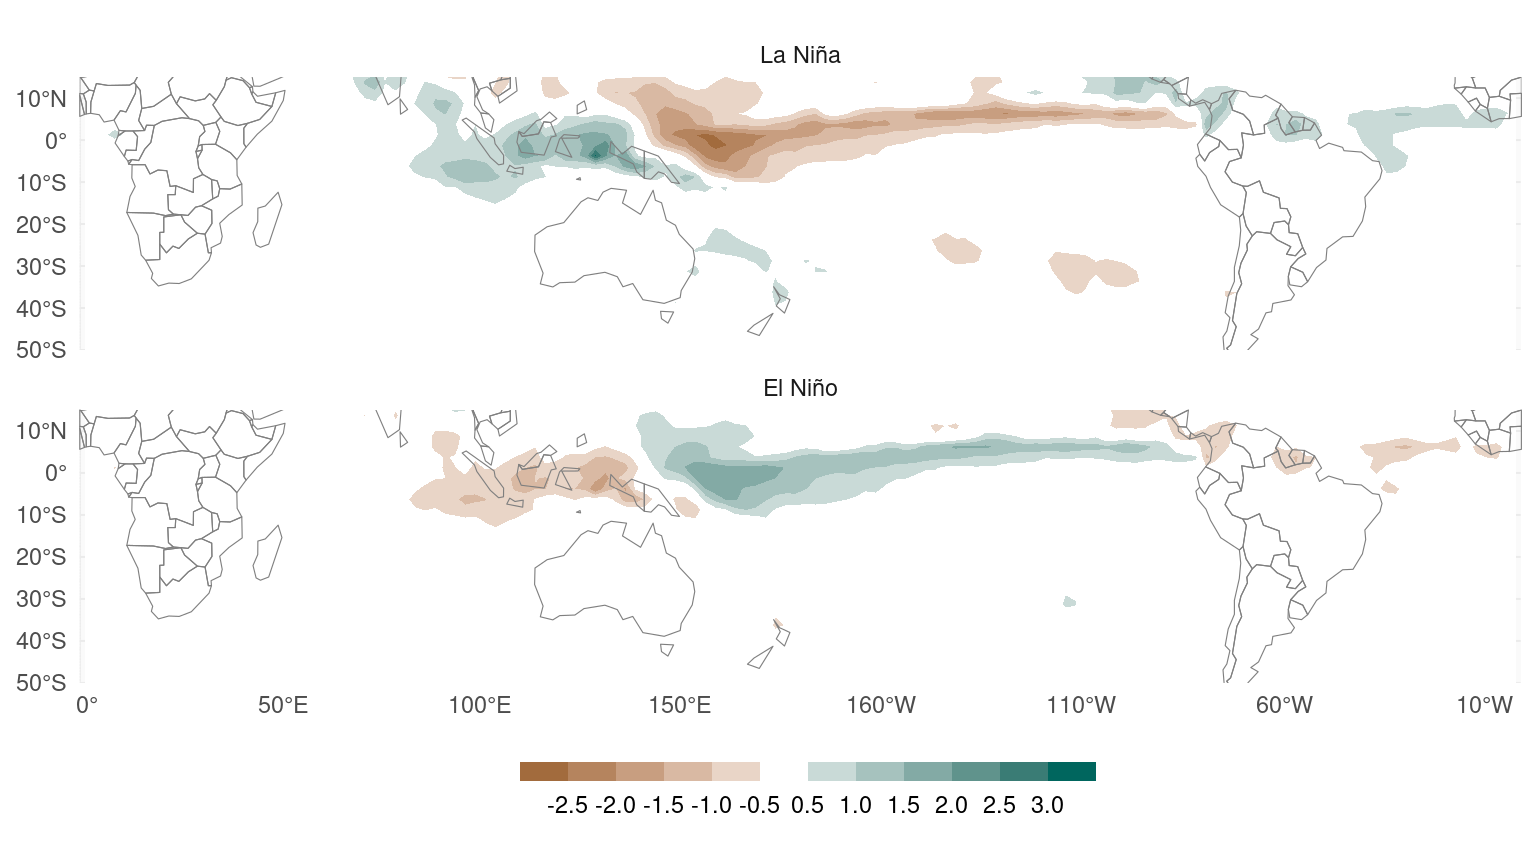 Maps of the Southern Hemisphere (10ºN to 50ºS) with filled contours. The patterns of contours are similar to the first figure, but this time the values in the La Niña panel are much bigger in magnitude than the values in the El Niño panel.